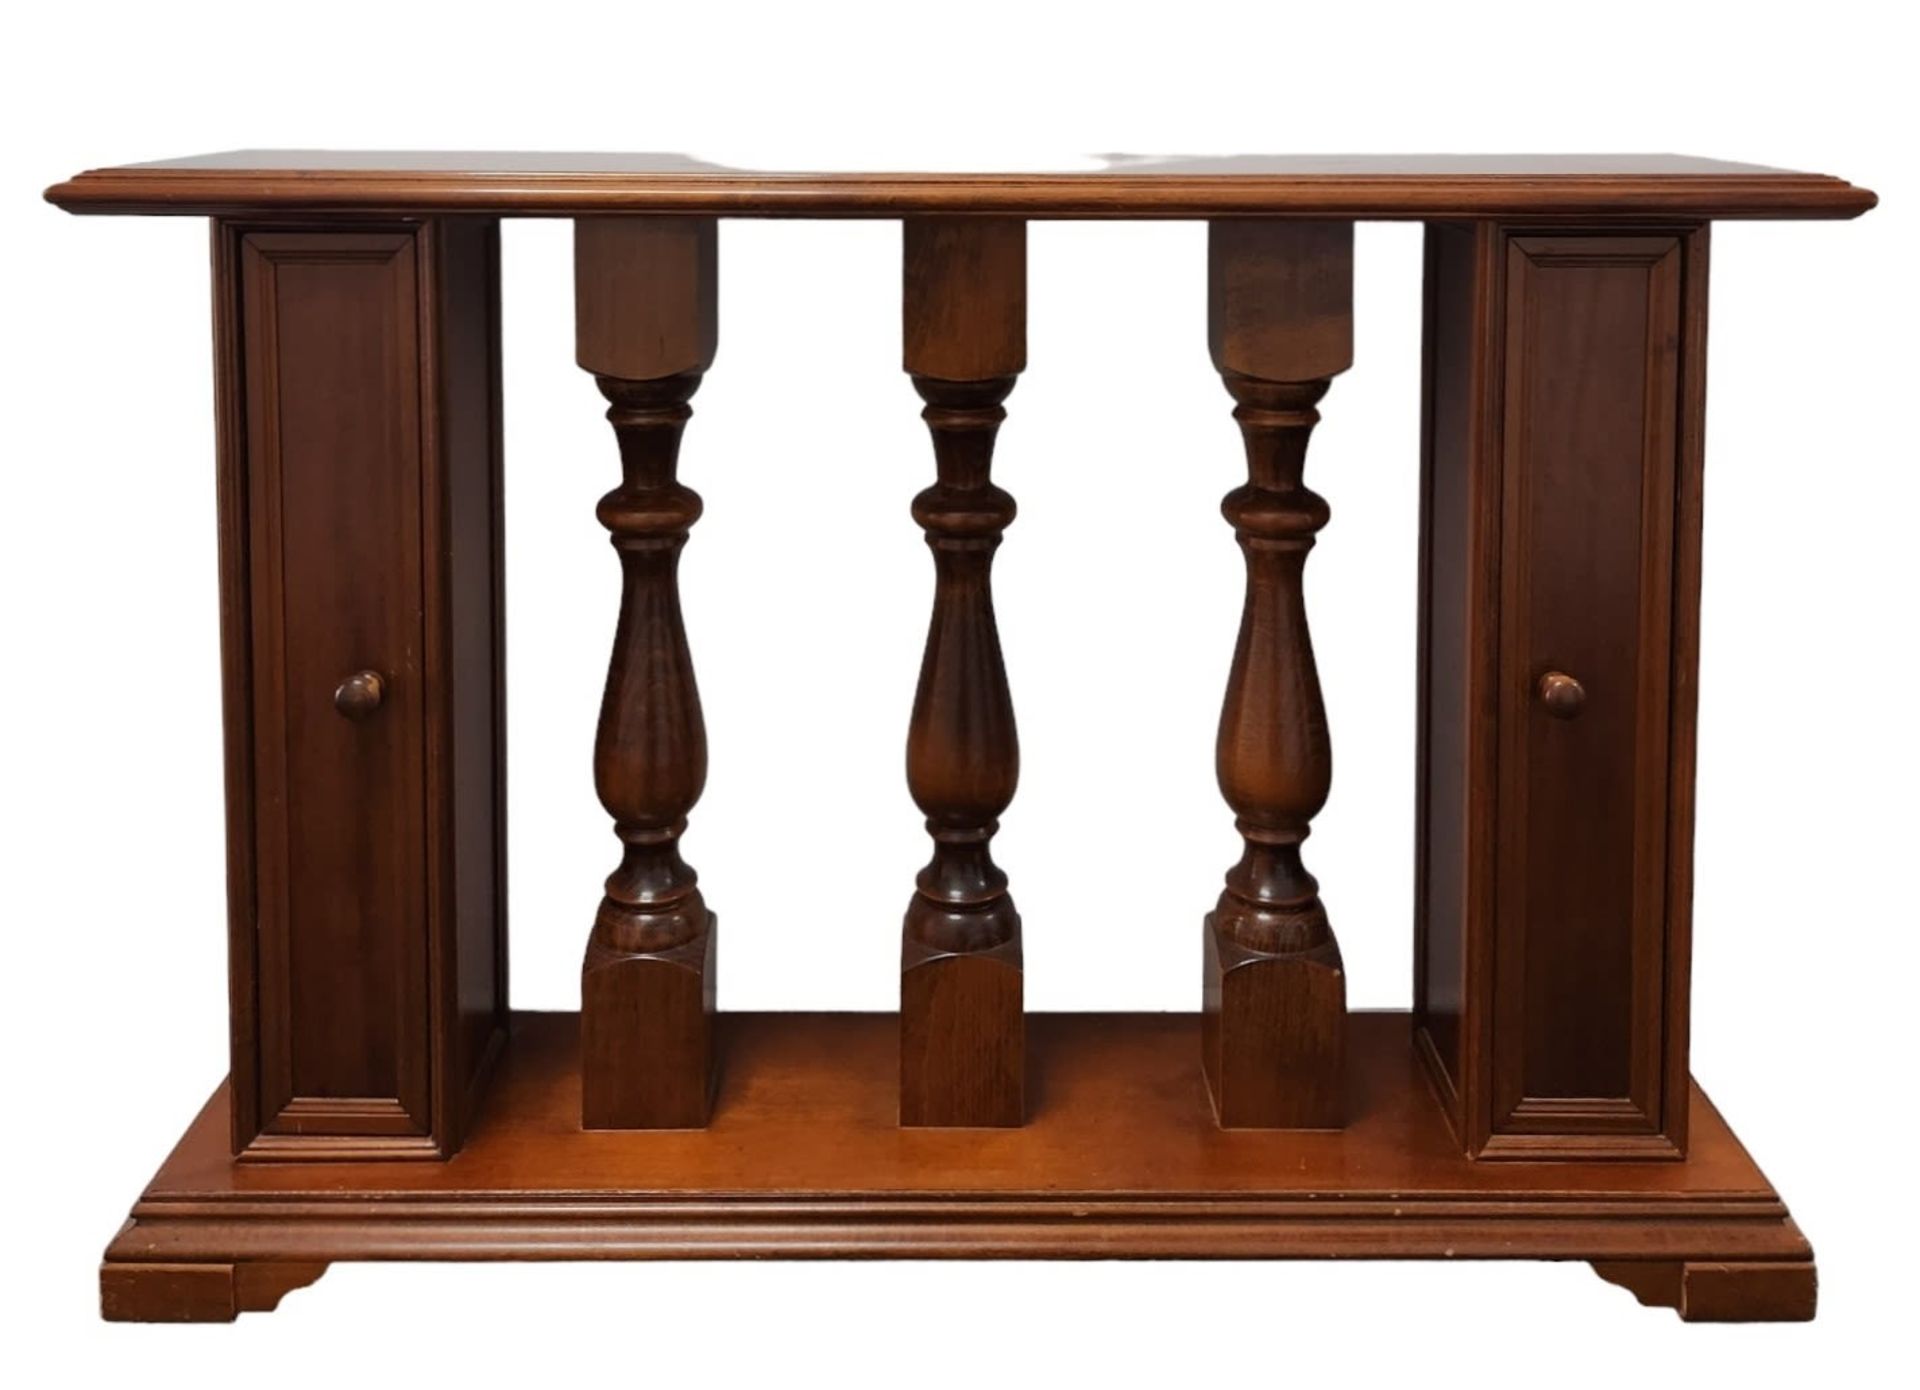 Console (furniture), antique style furniture, made of wood. Height: 81 cm. Width: 31 cm. Length: 122